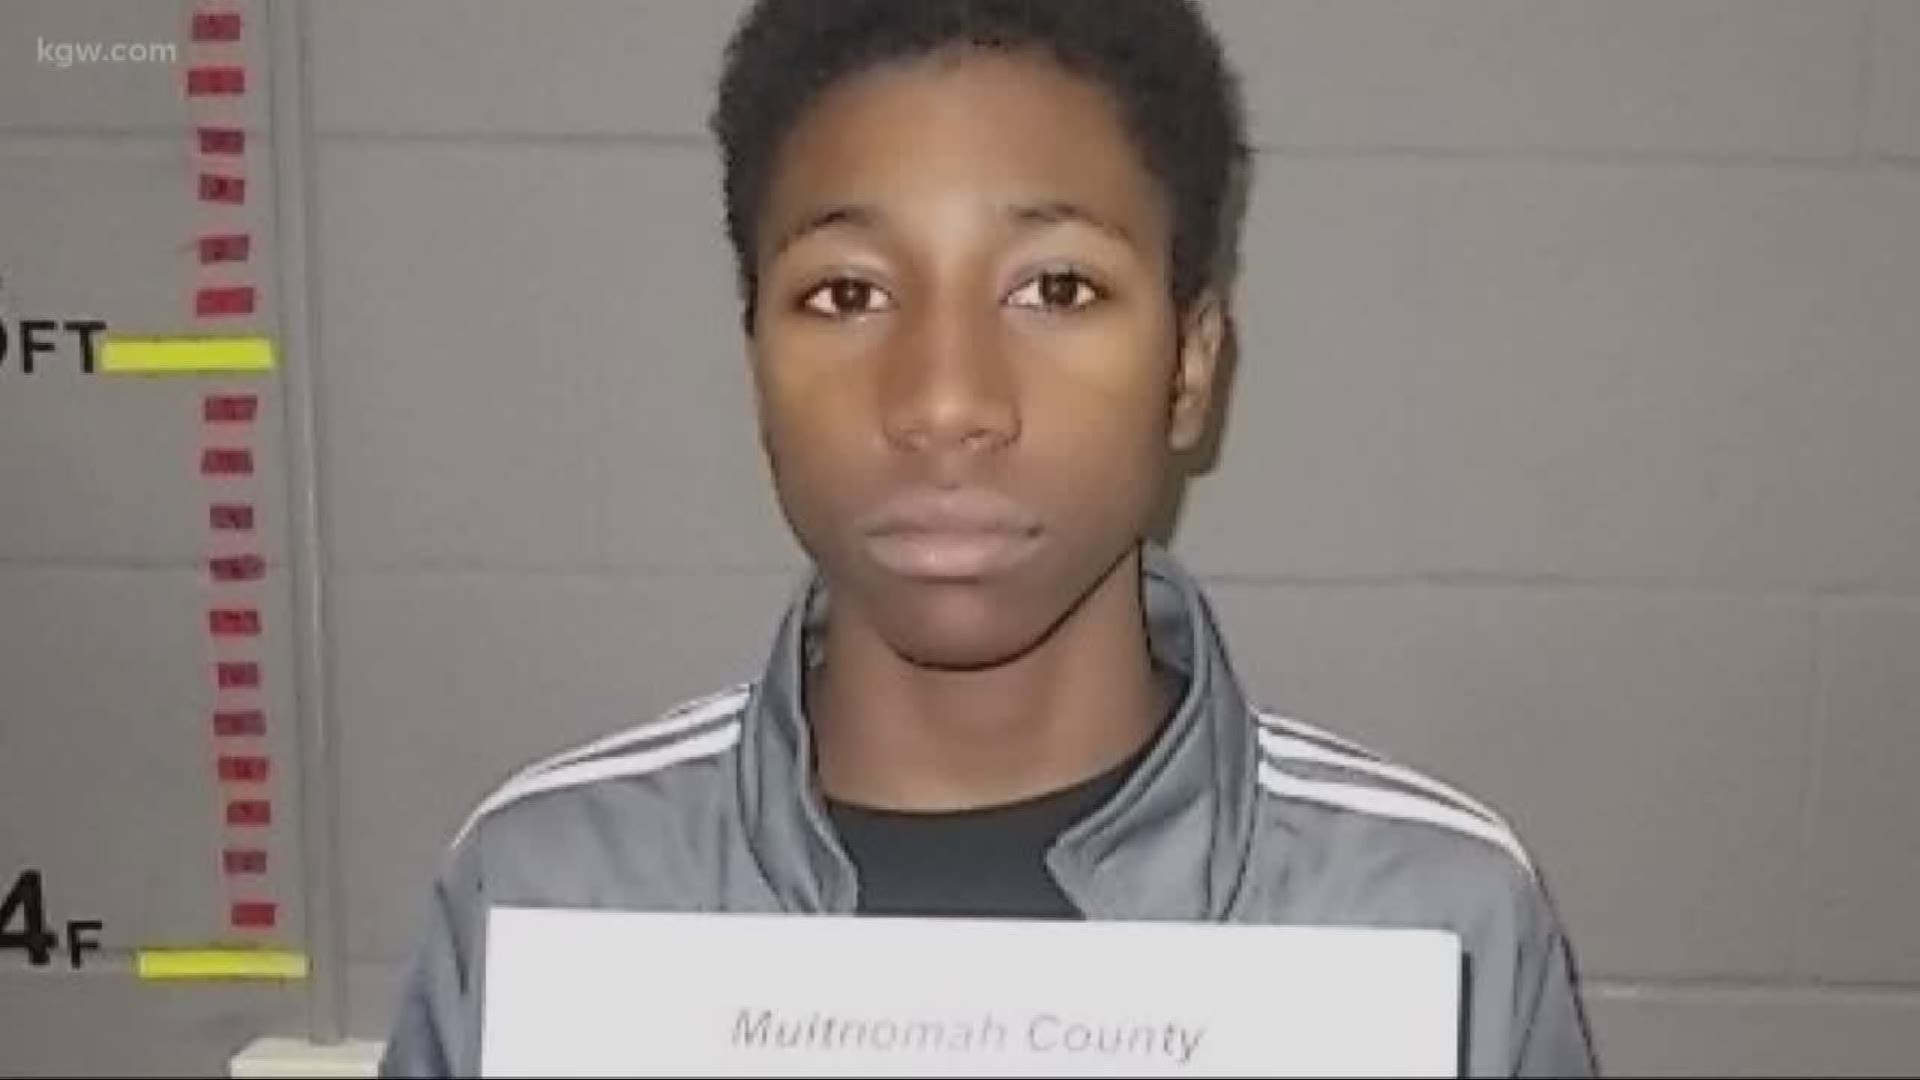 Jeremiah Hannon, 15, is facing murder charges in connection with a shooting at a Portland Motel 6 last December. Police say he also beat up a man aboard a MAX train a week prior to the shooting. He's due in court Friday for the murder charge.